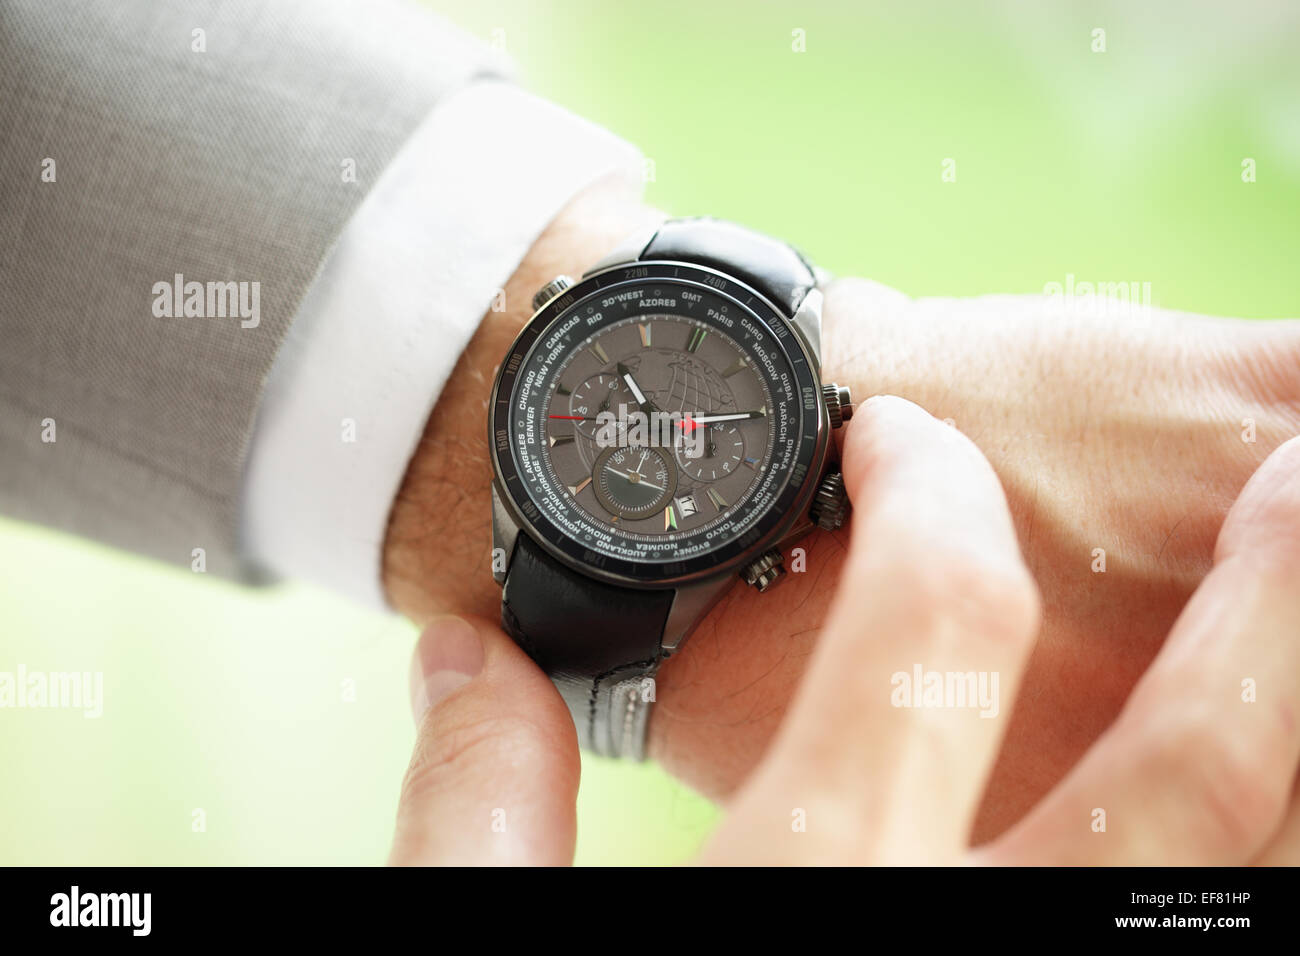 Businessman checking the time on his wrist watch concept for urgency, deadline or running late Stock Photo